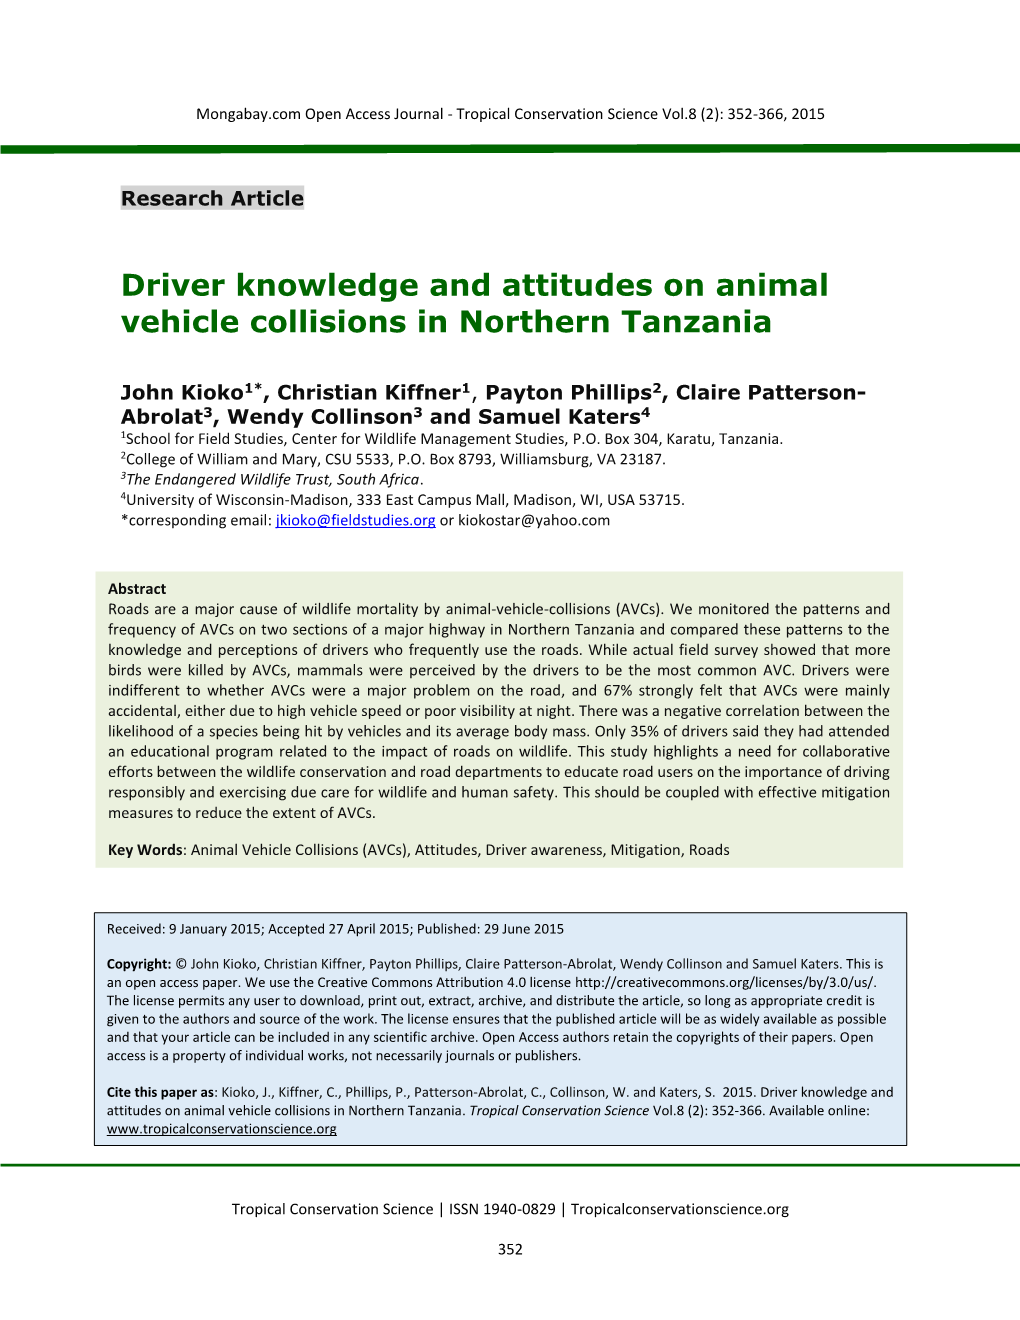 Driver Knowledge and Attitudes on Animal Vehicle Collisions in Northern Tanzania